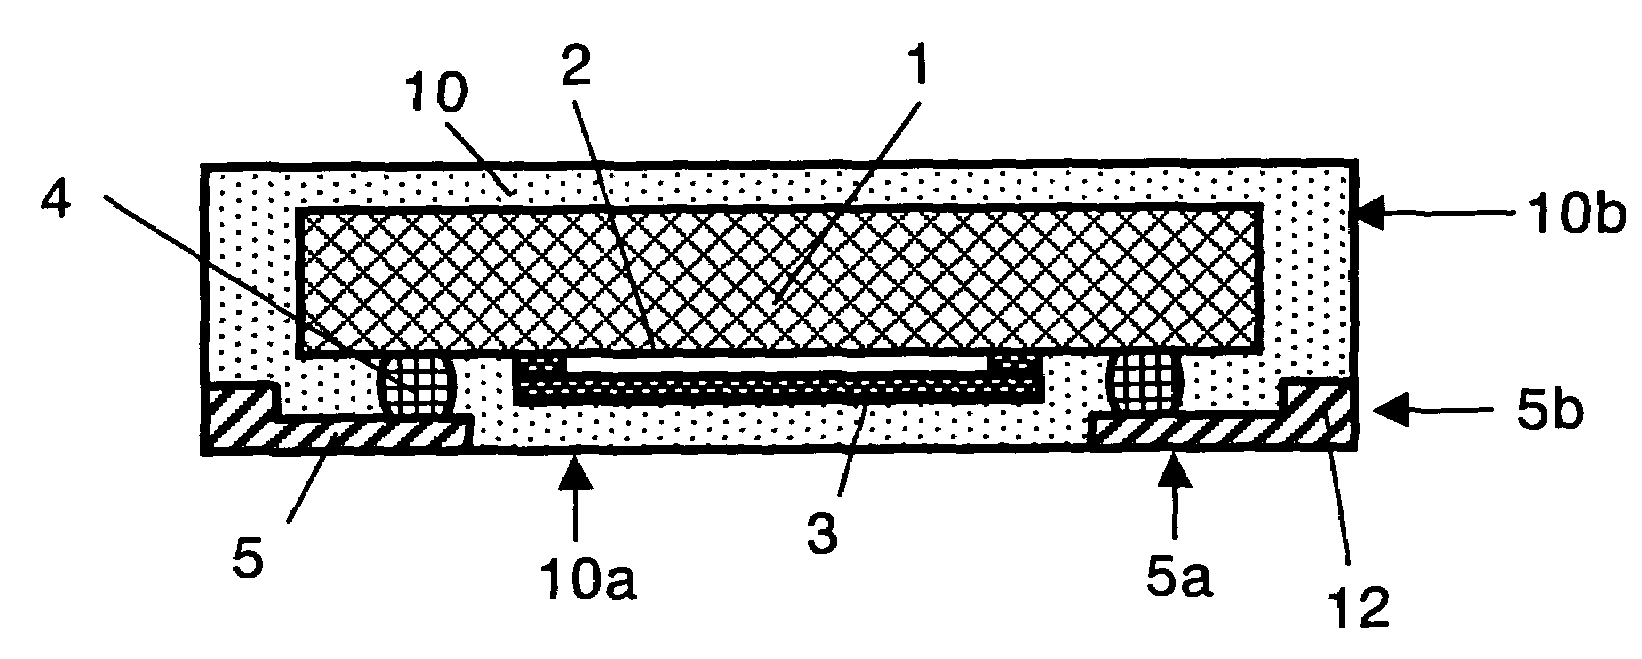 Surface acoustic wave device, method for manufacturing, and electronic circuit device